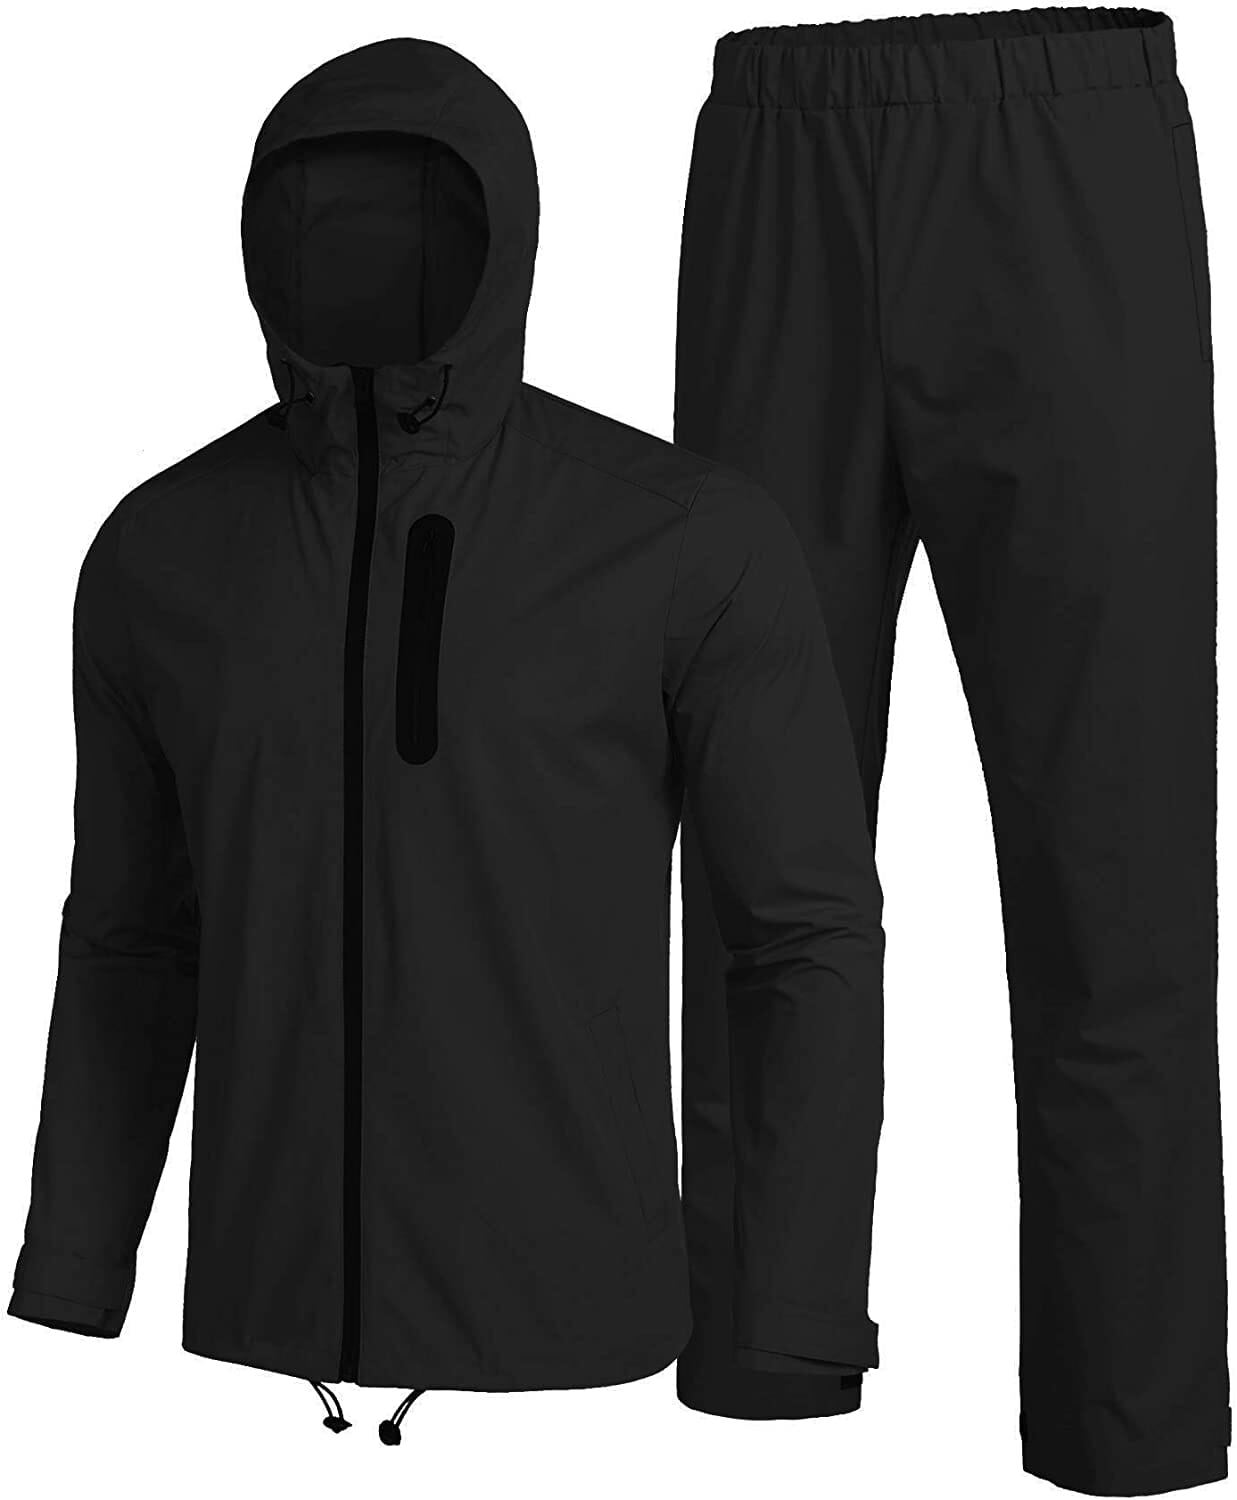 Waterproof Lightweight Camping Rain Suit (US Only) Sports Set COOFANDY Store Black S 